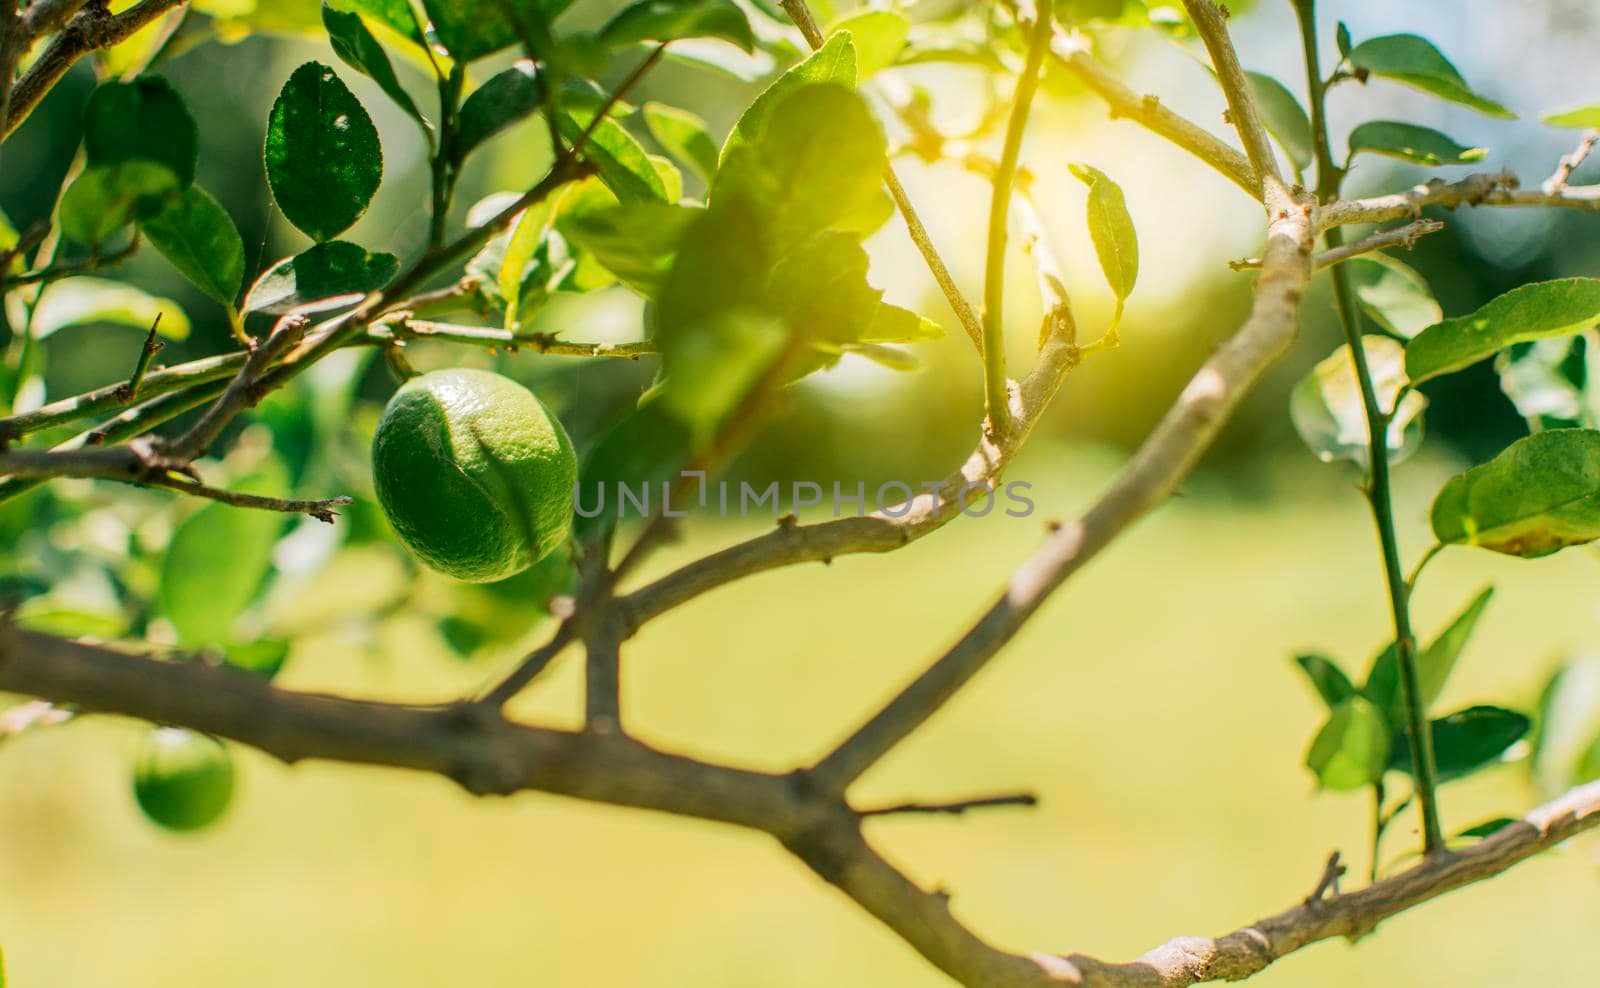 Beautiful unripe lemons in a garden with out of focus background, beautiful green lemons hanging on a branch, Green lemons in a gardener with natural background.